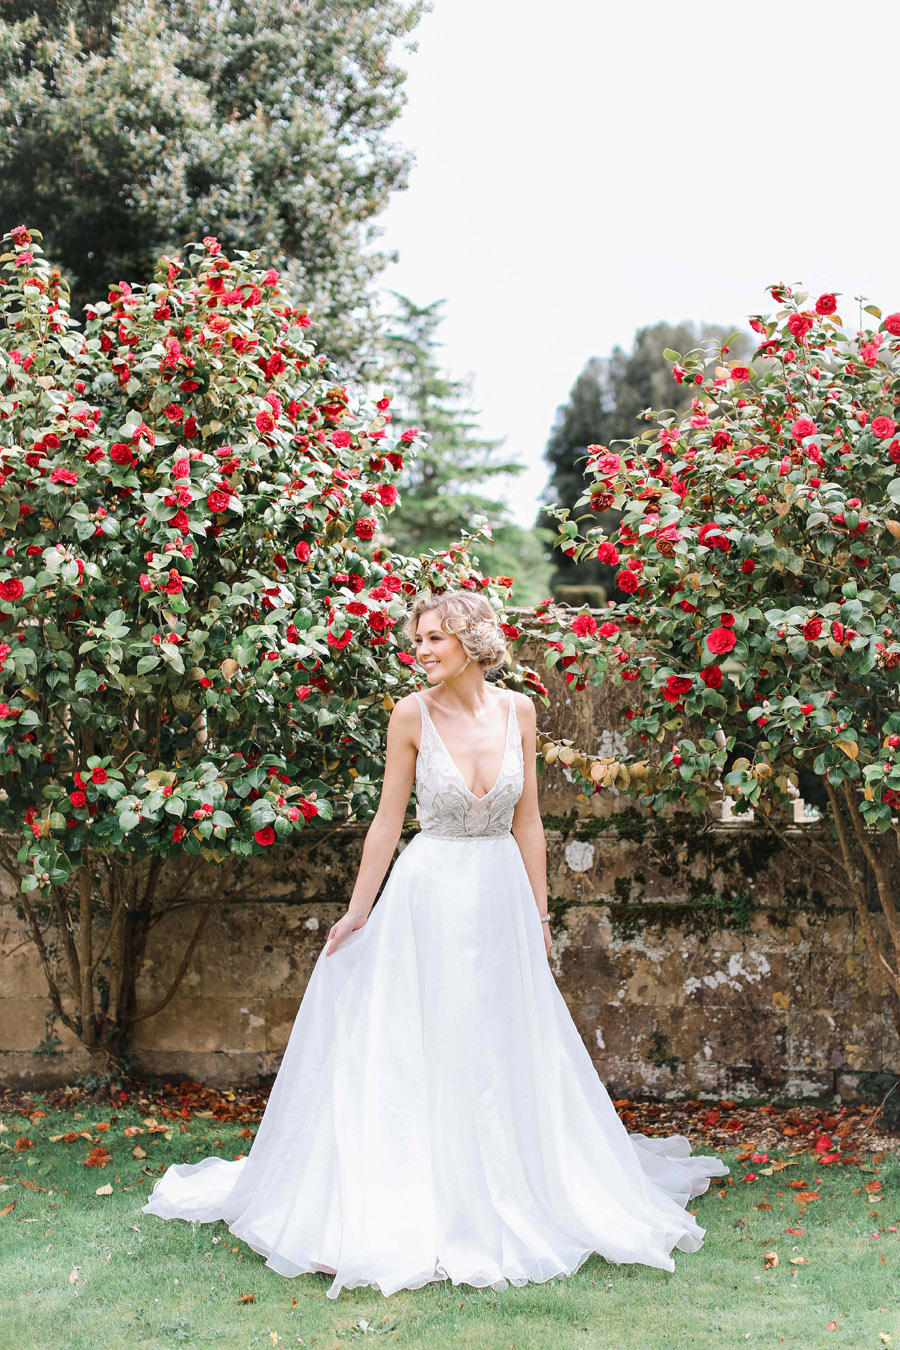 Romantic wedding ideas from Hale Park, photo by Charlotte Wise Photography (7)